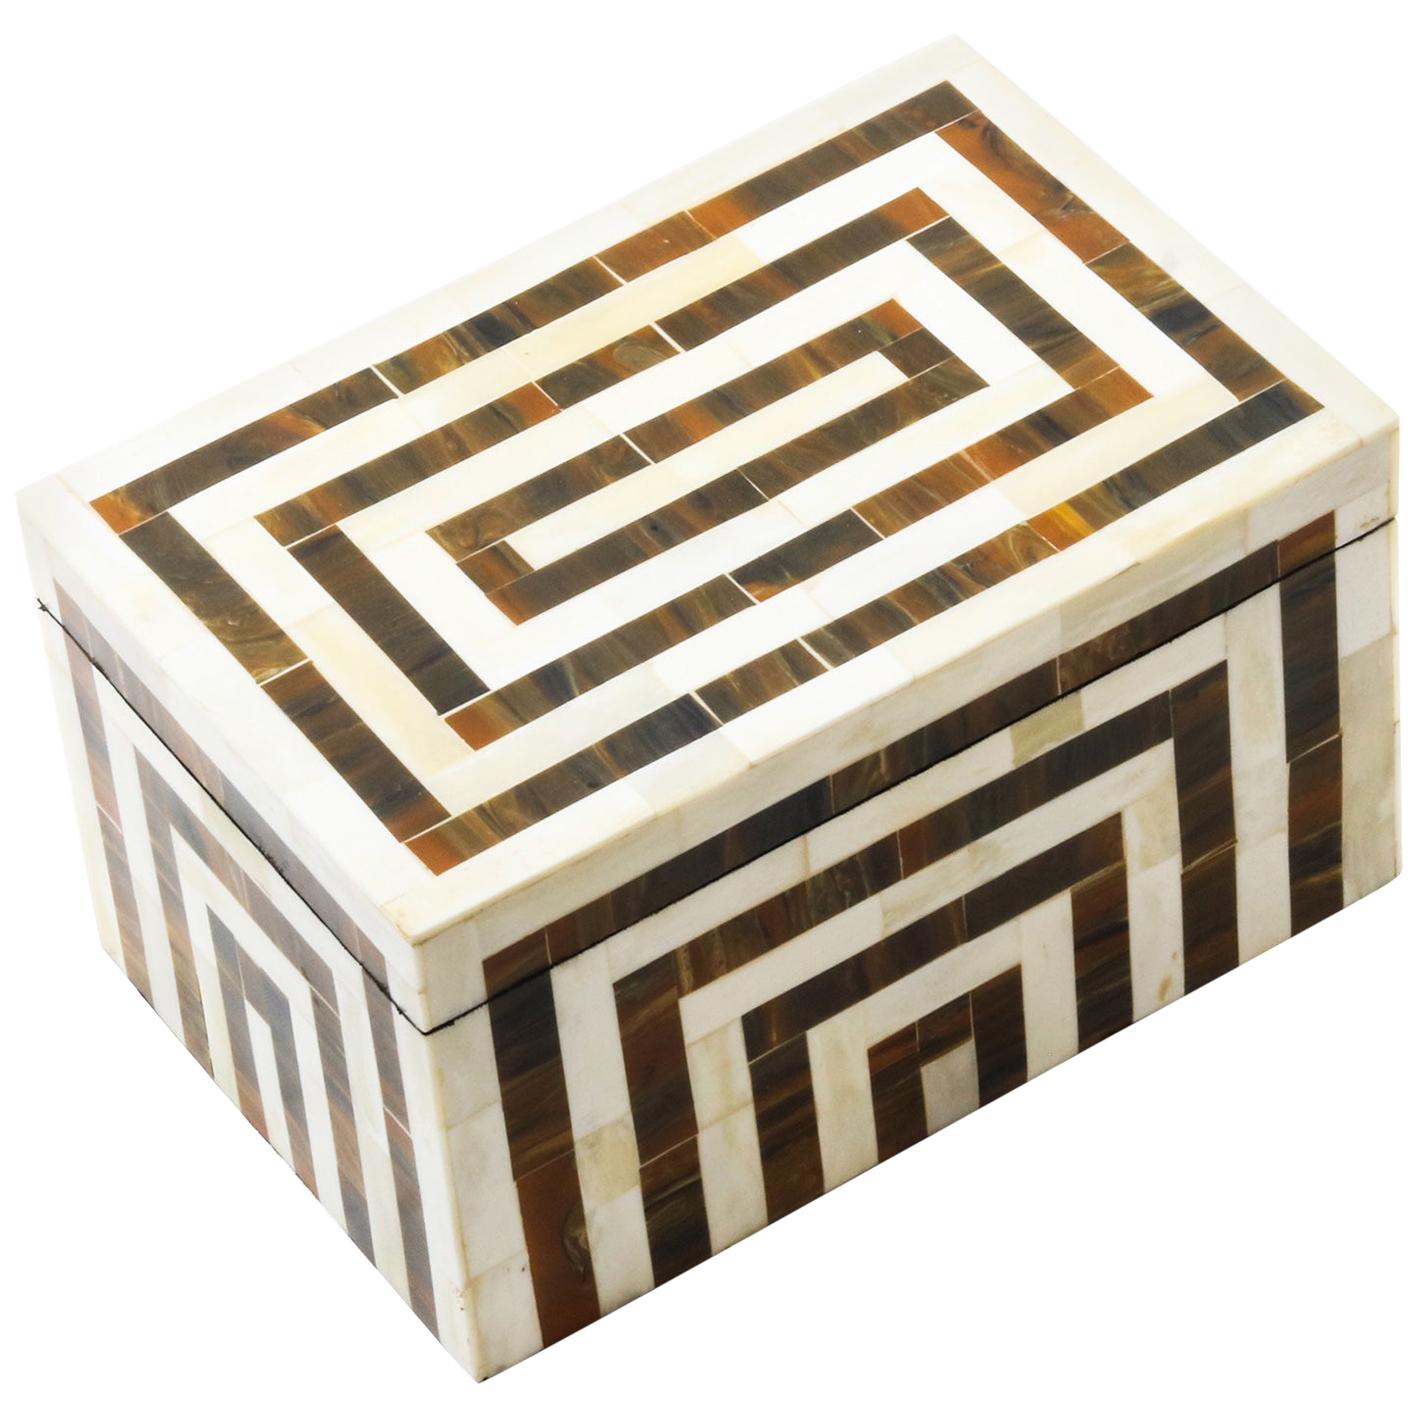 Harvey Box in Ivory and Brown by Curatedkravet